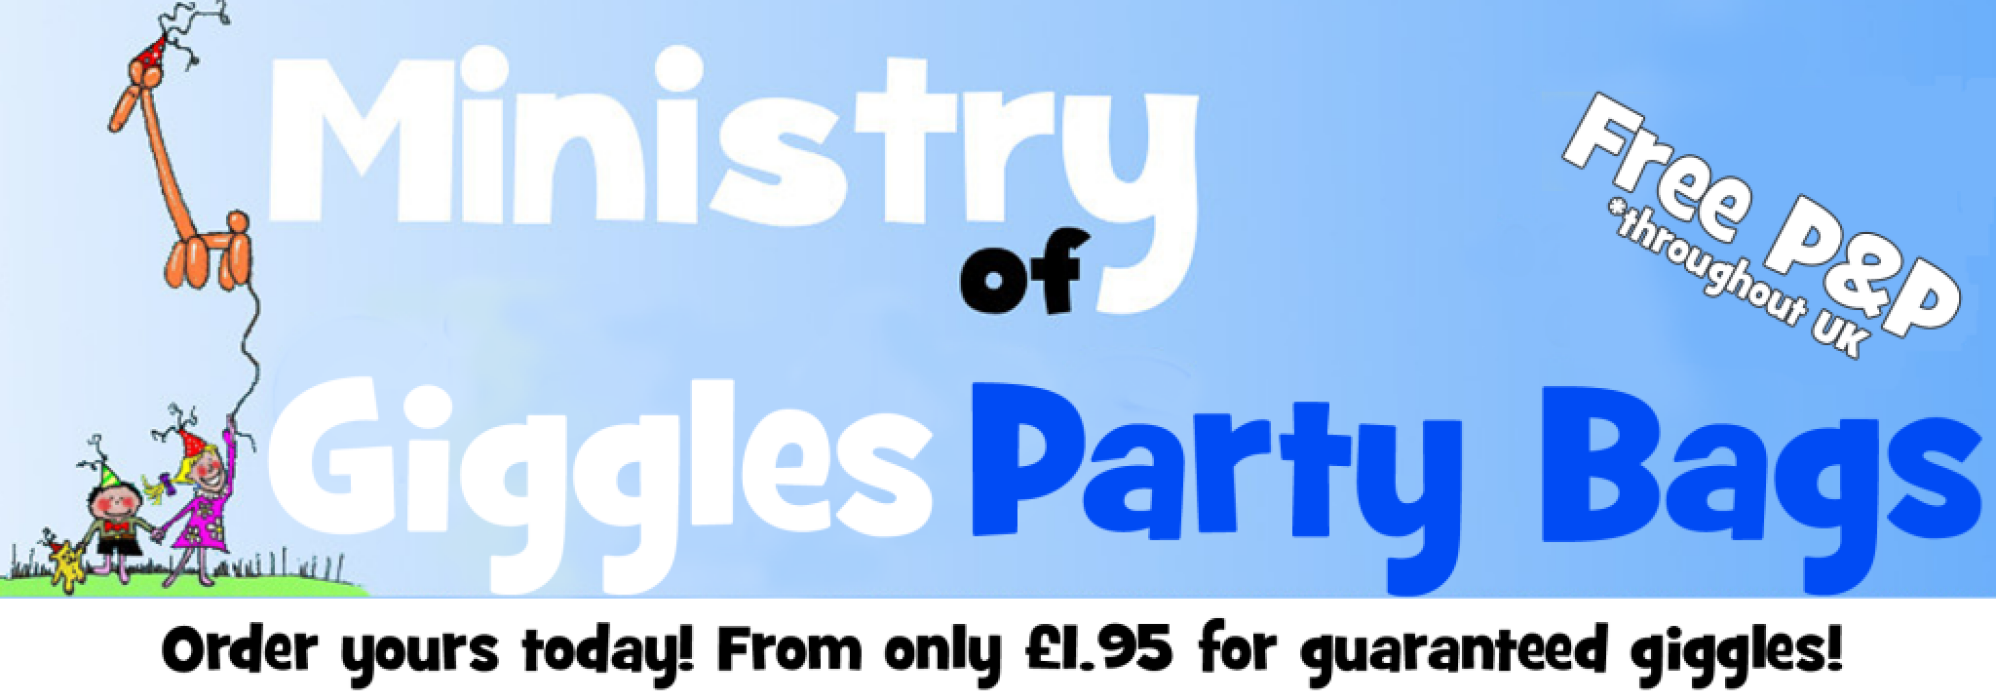 Ministry of Giggles Party Bags